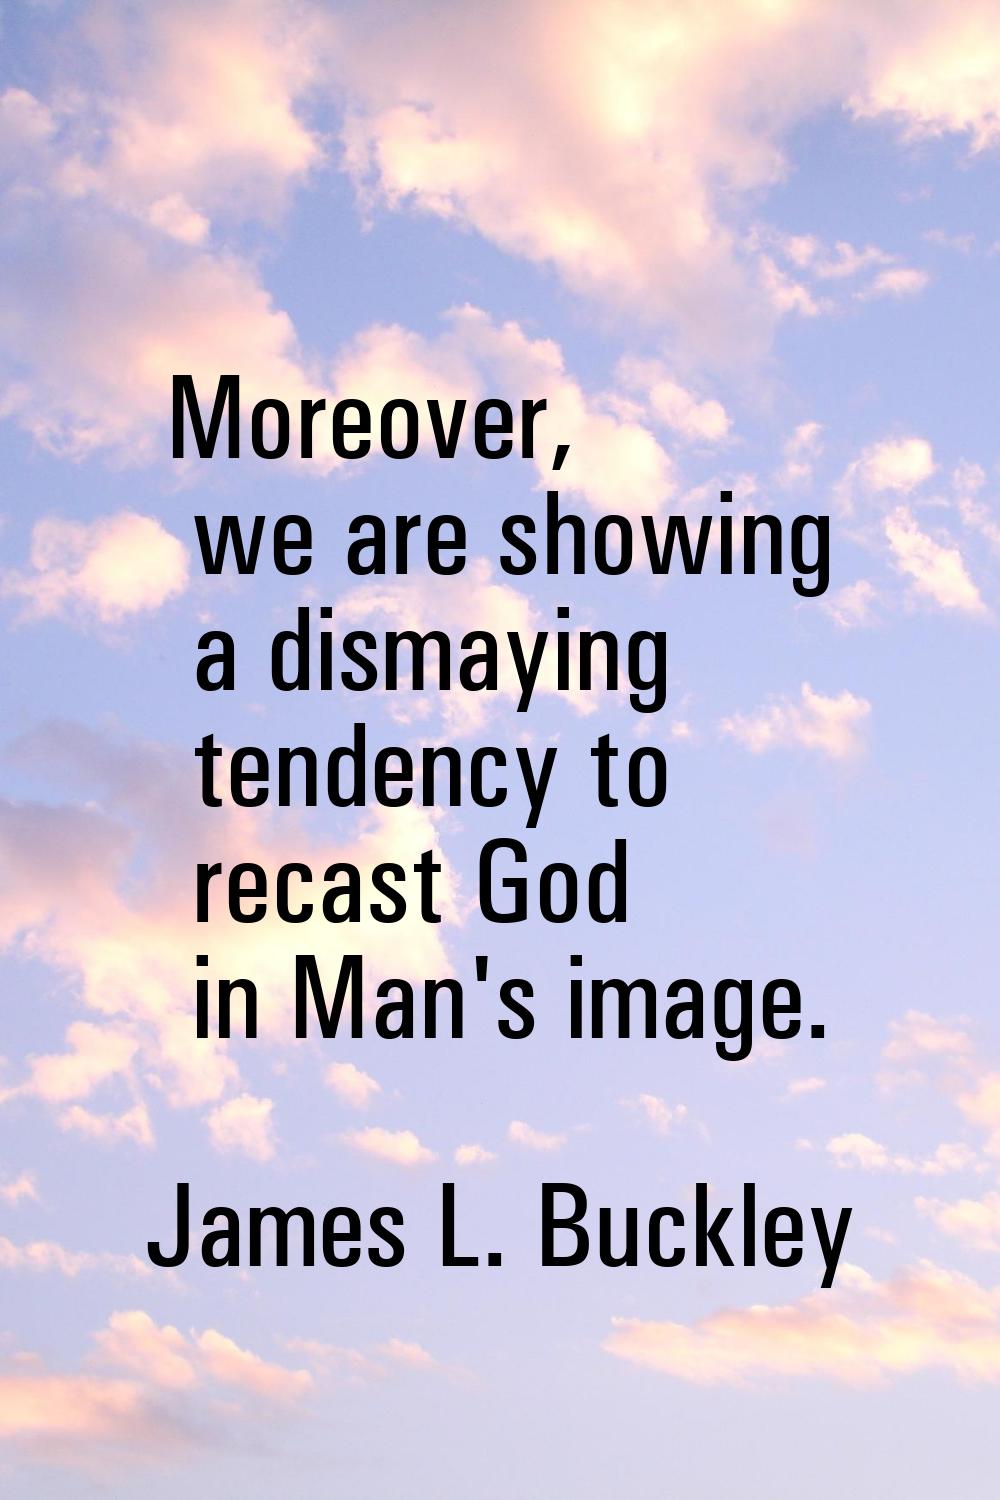 Moreover, we are showing a dismaying tendency to recast God in Man's image.